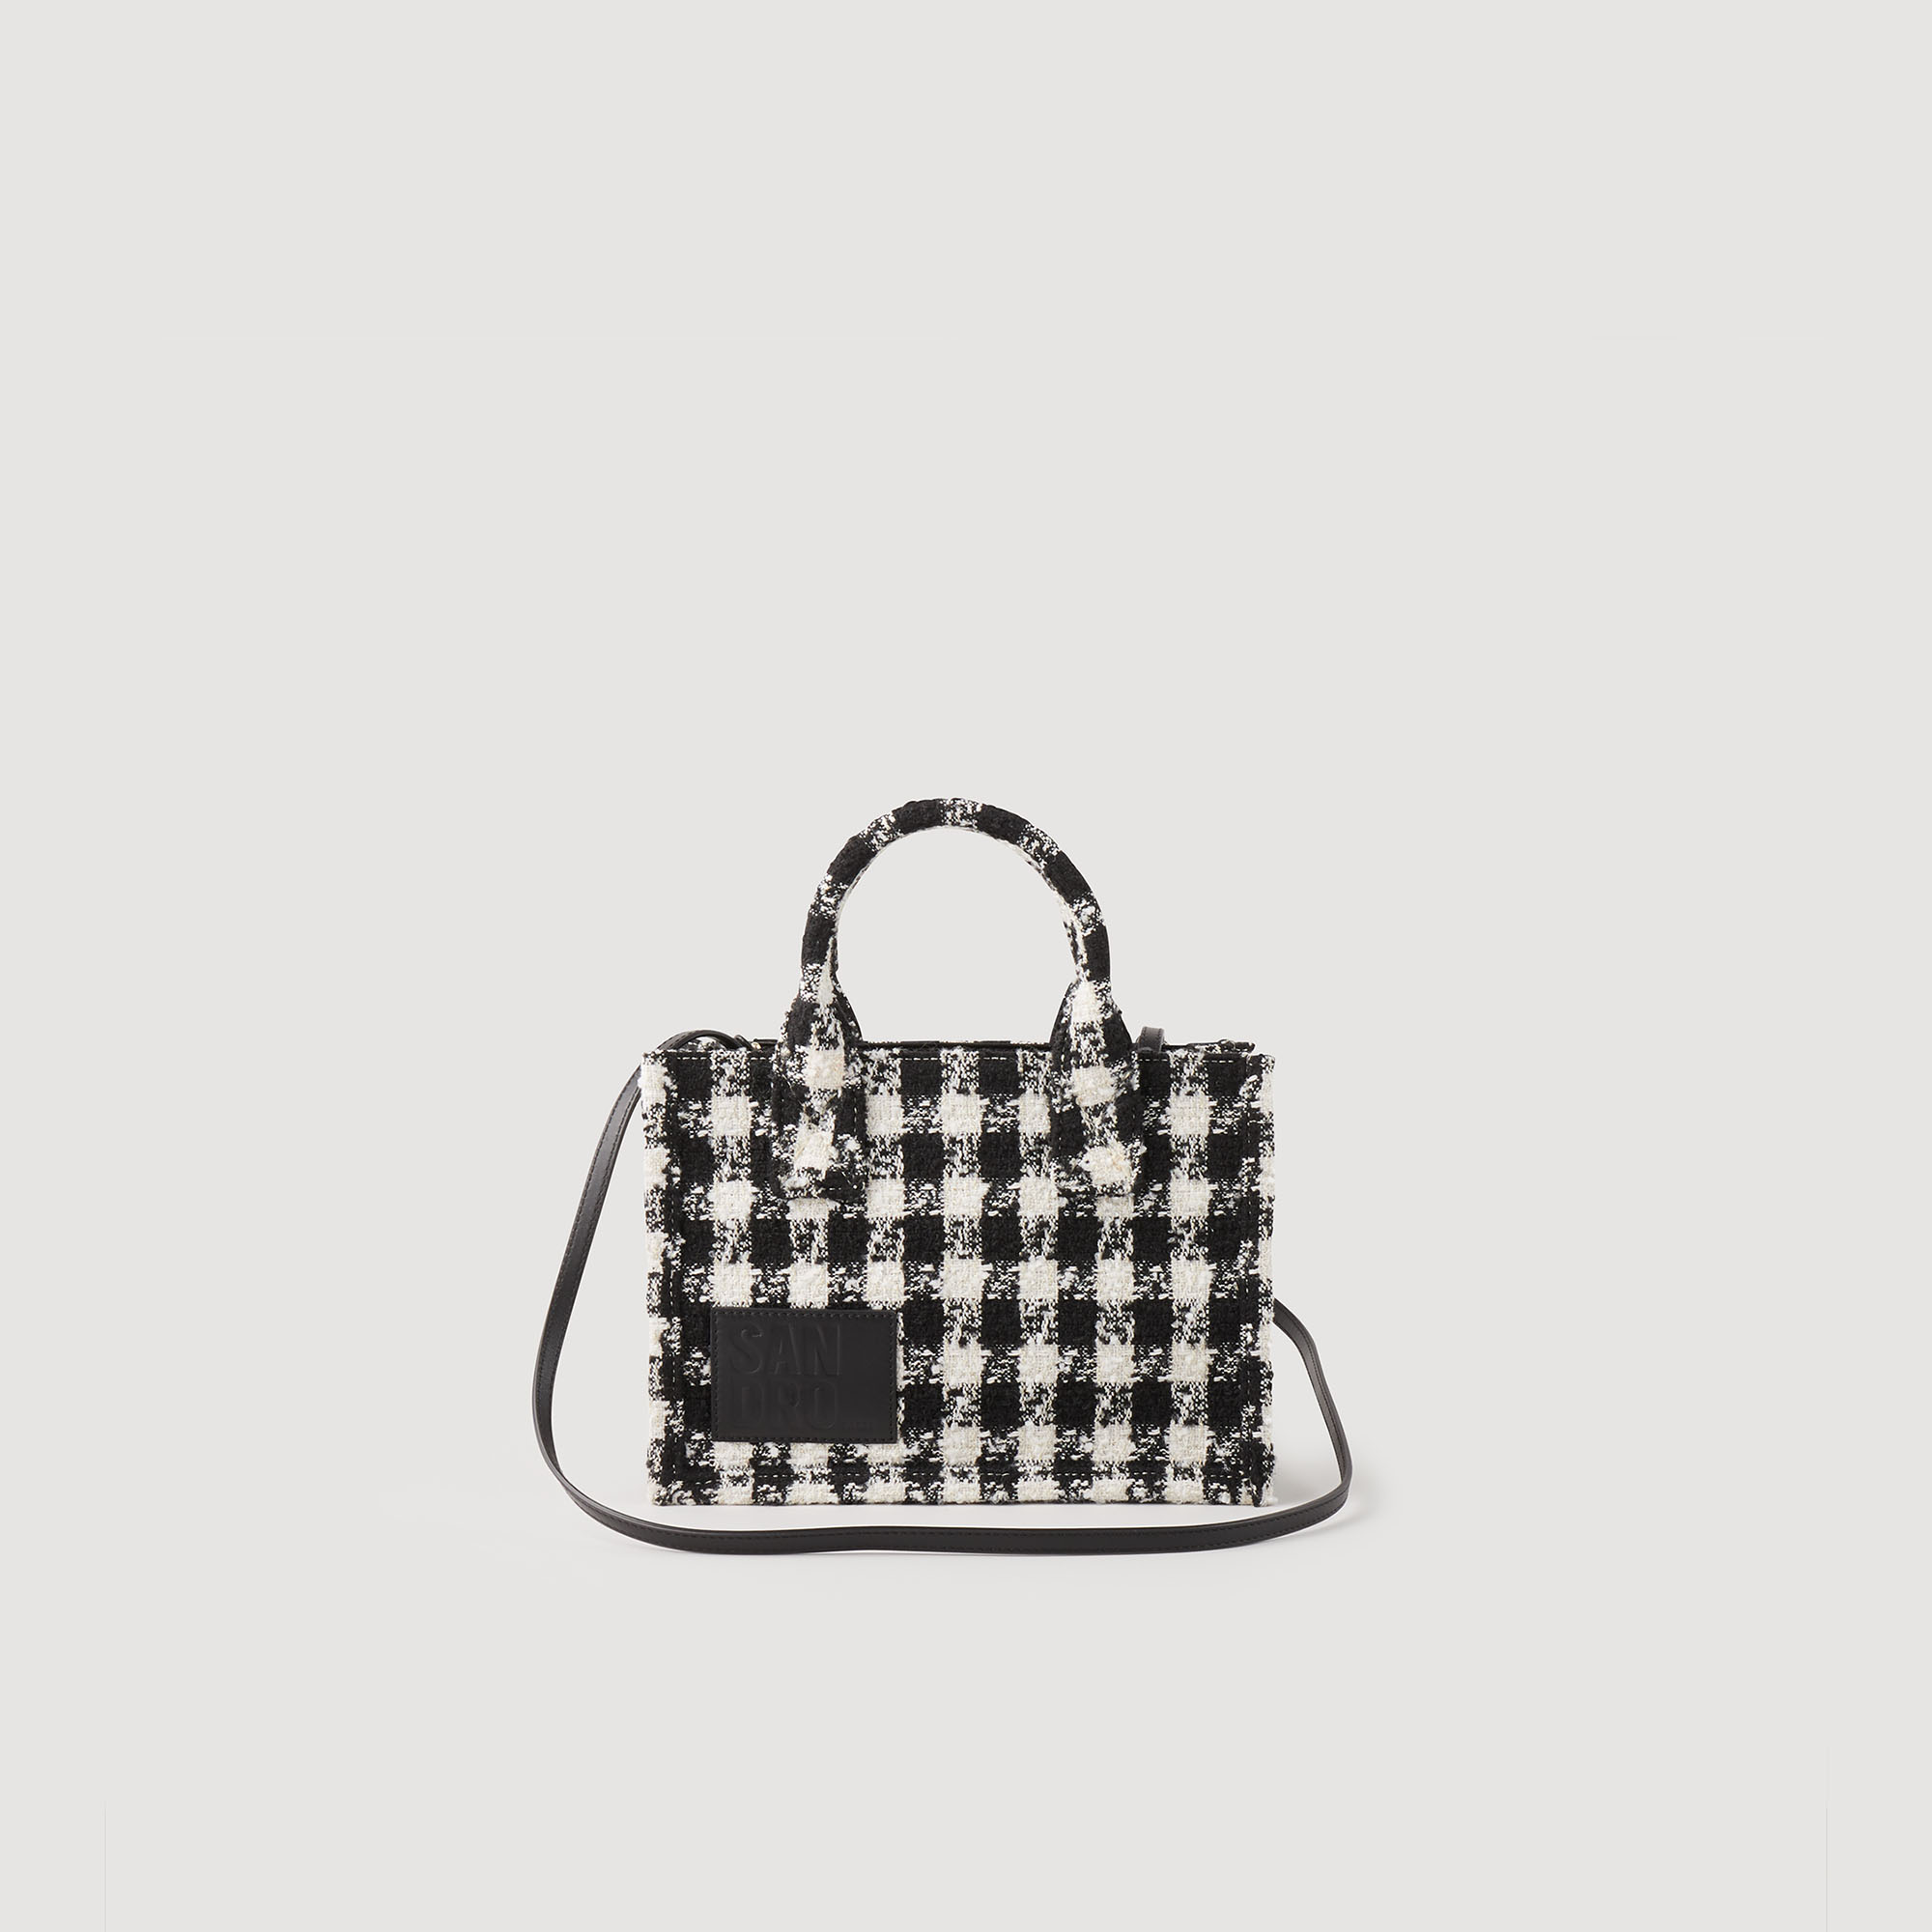 Sandro polyester Small tote bag in houndstooth-printed tweed with an embossed Sandro label, a magnetic fastening, small handles, and an inner pouch